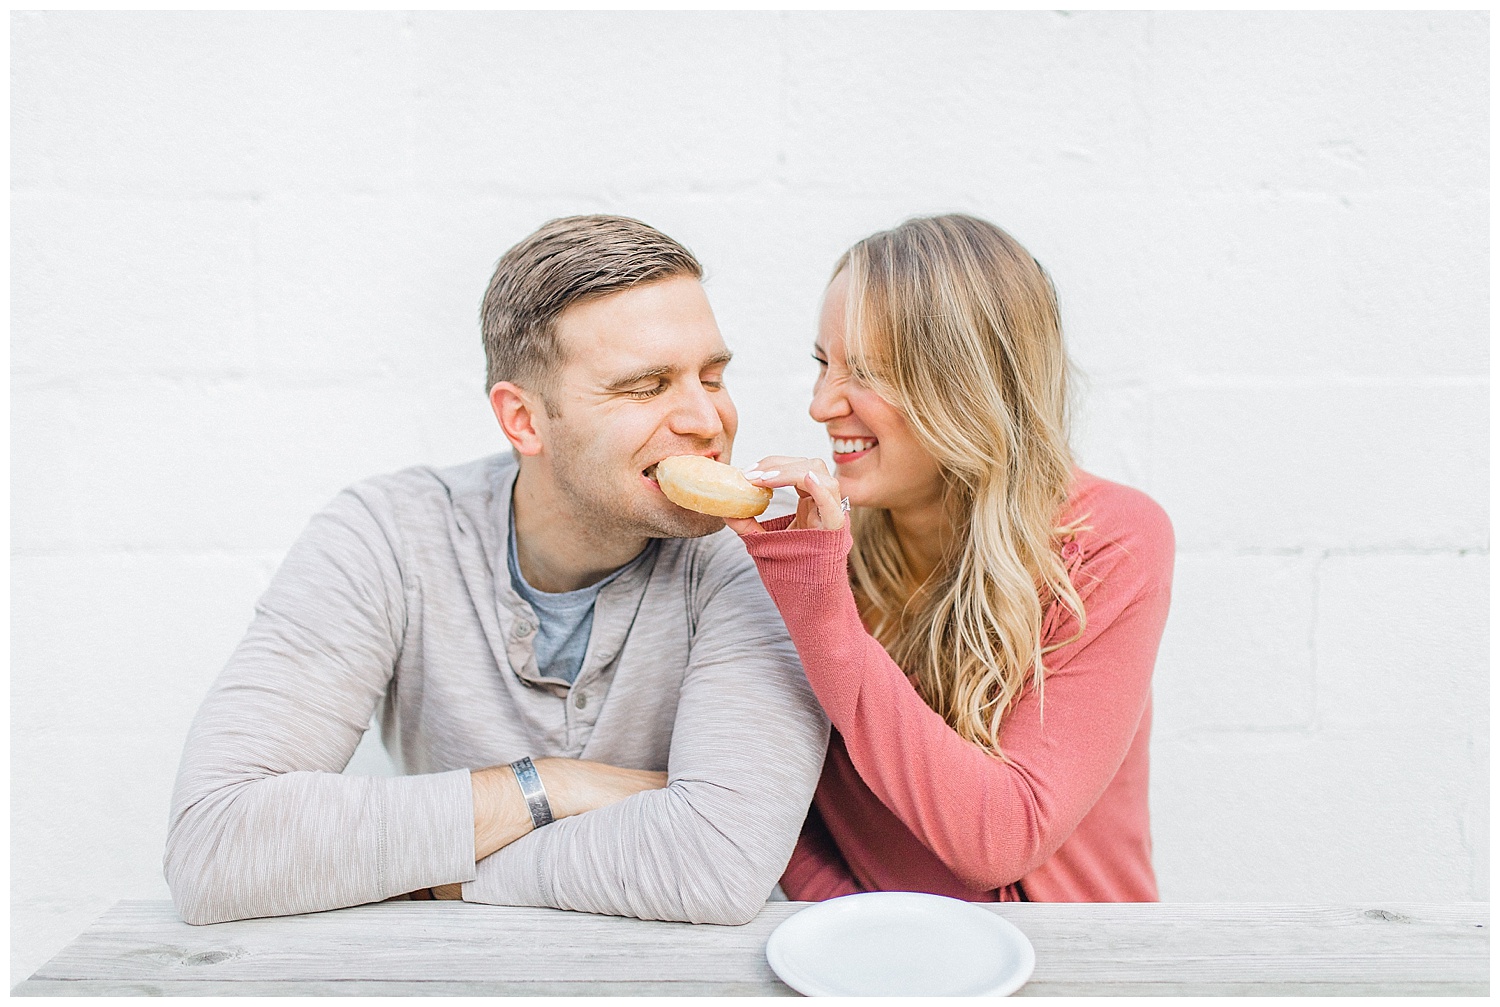 ERC_0833_Downtown Nashville Engagement Session at Barista Parlor | Emma Rose Company Wedding Photographer | Outfit Inspiration for Engagement Session | Kindred Light and Airy Photographer.jpg